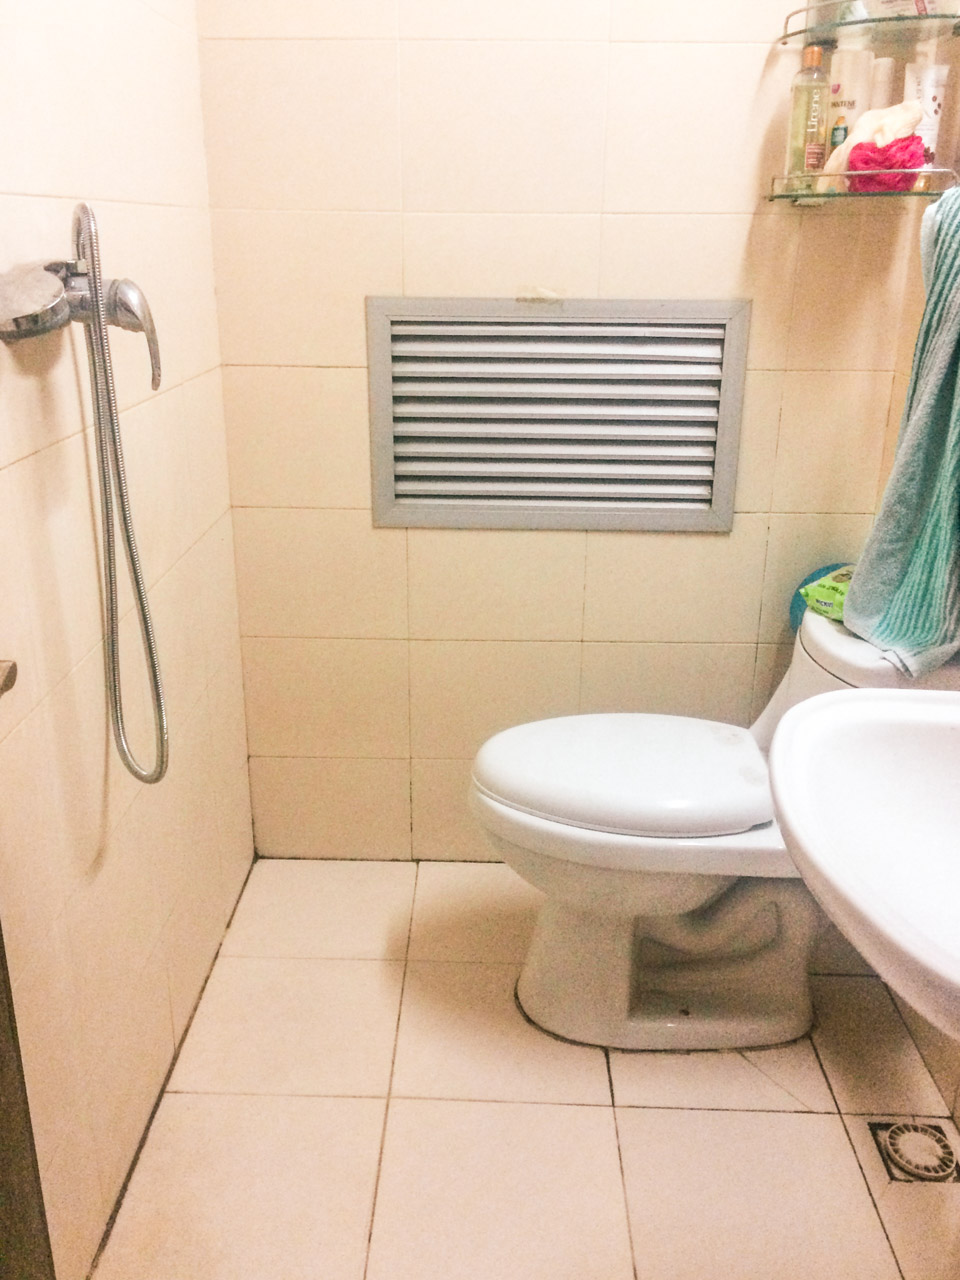 A typical Asian toilet with a shower head hanging from the wall